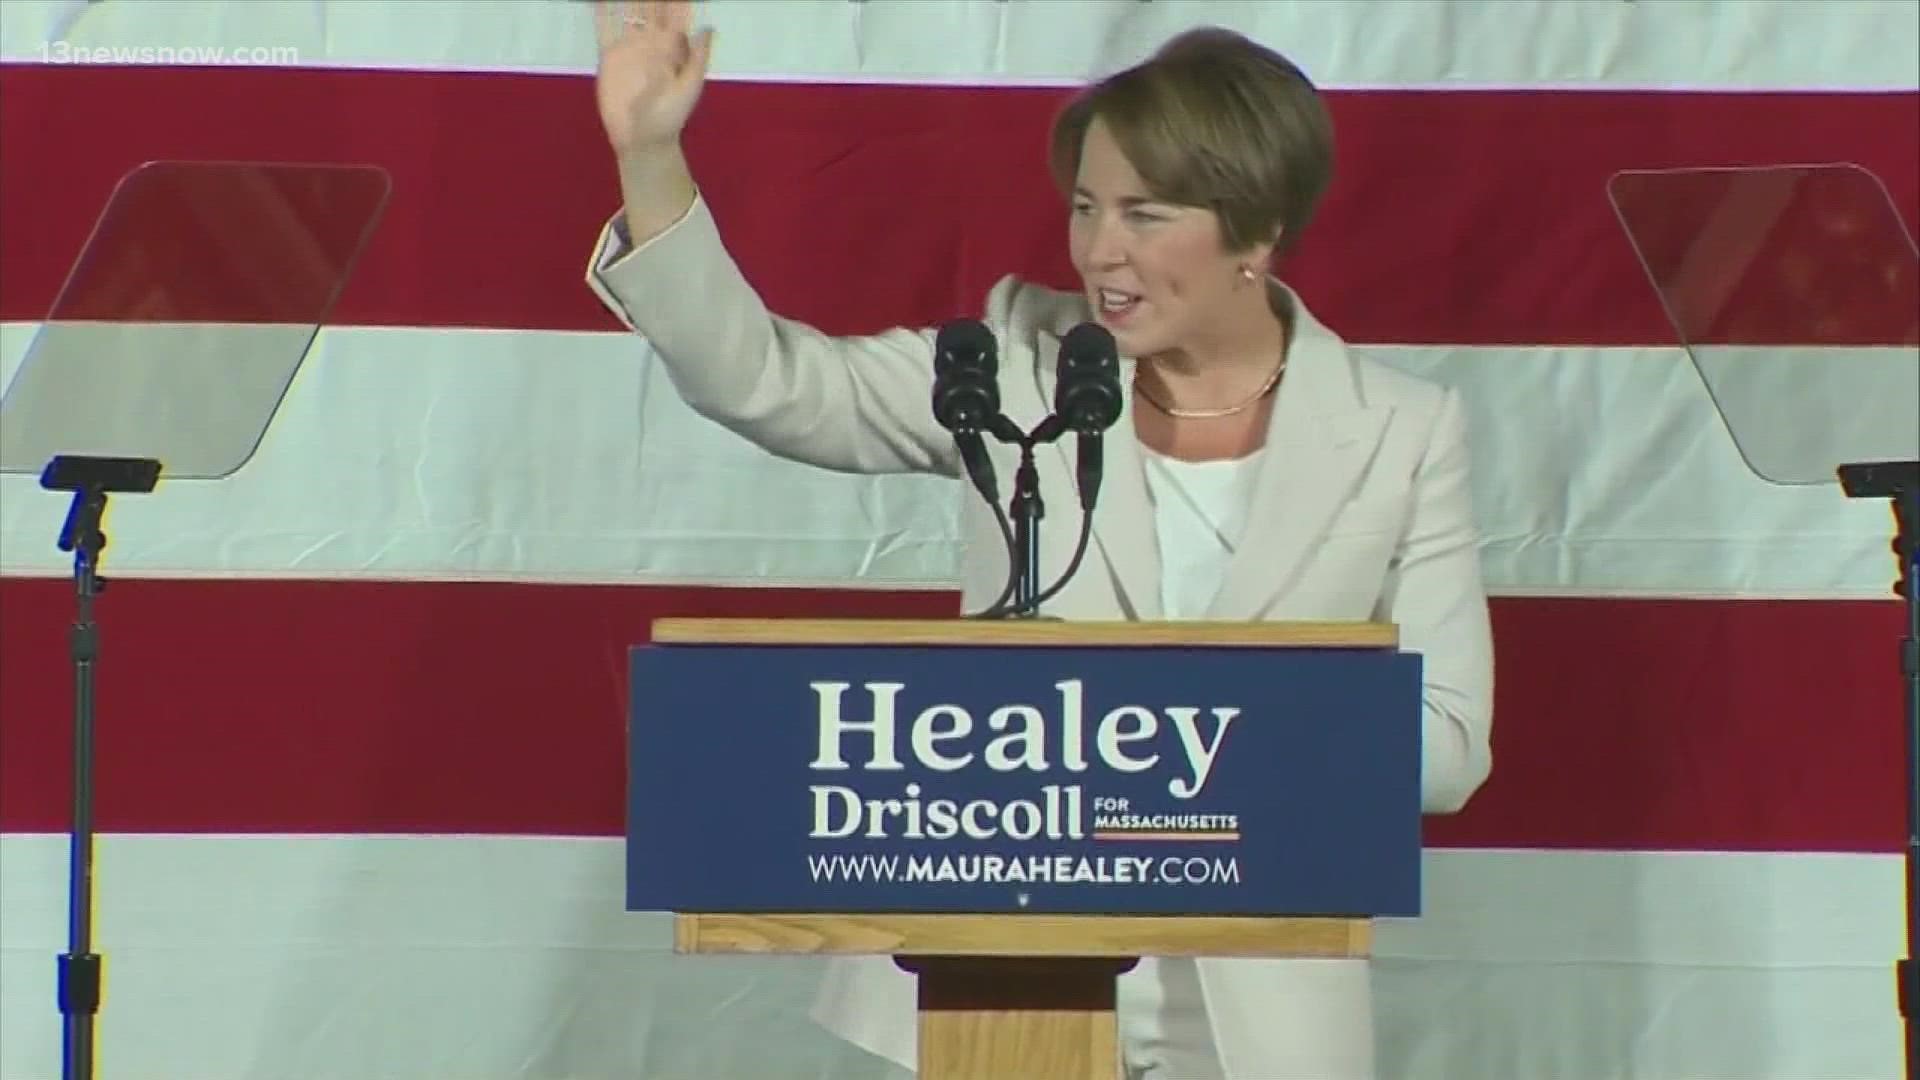 Healey was one of two openly lesbian candidates who ran to be a governor in the country.